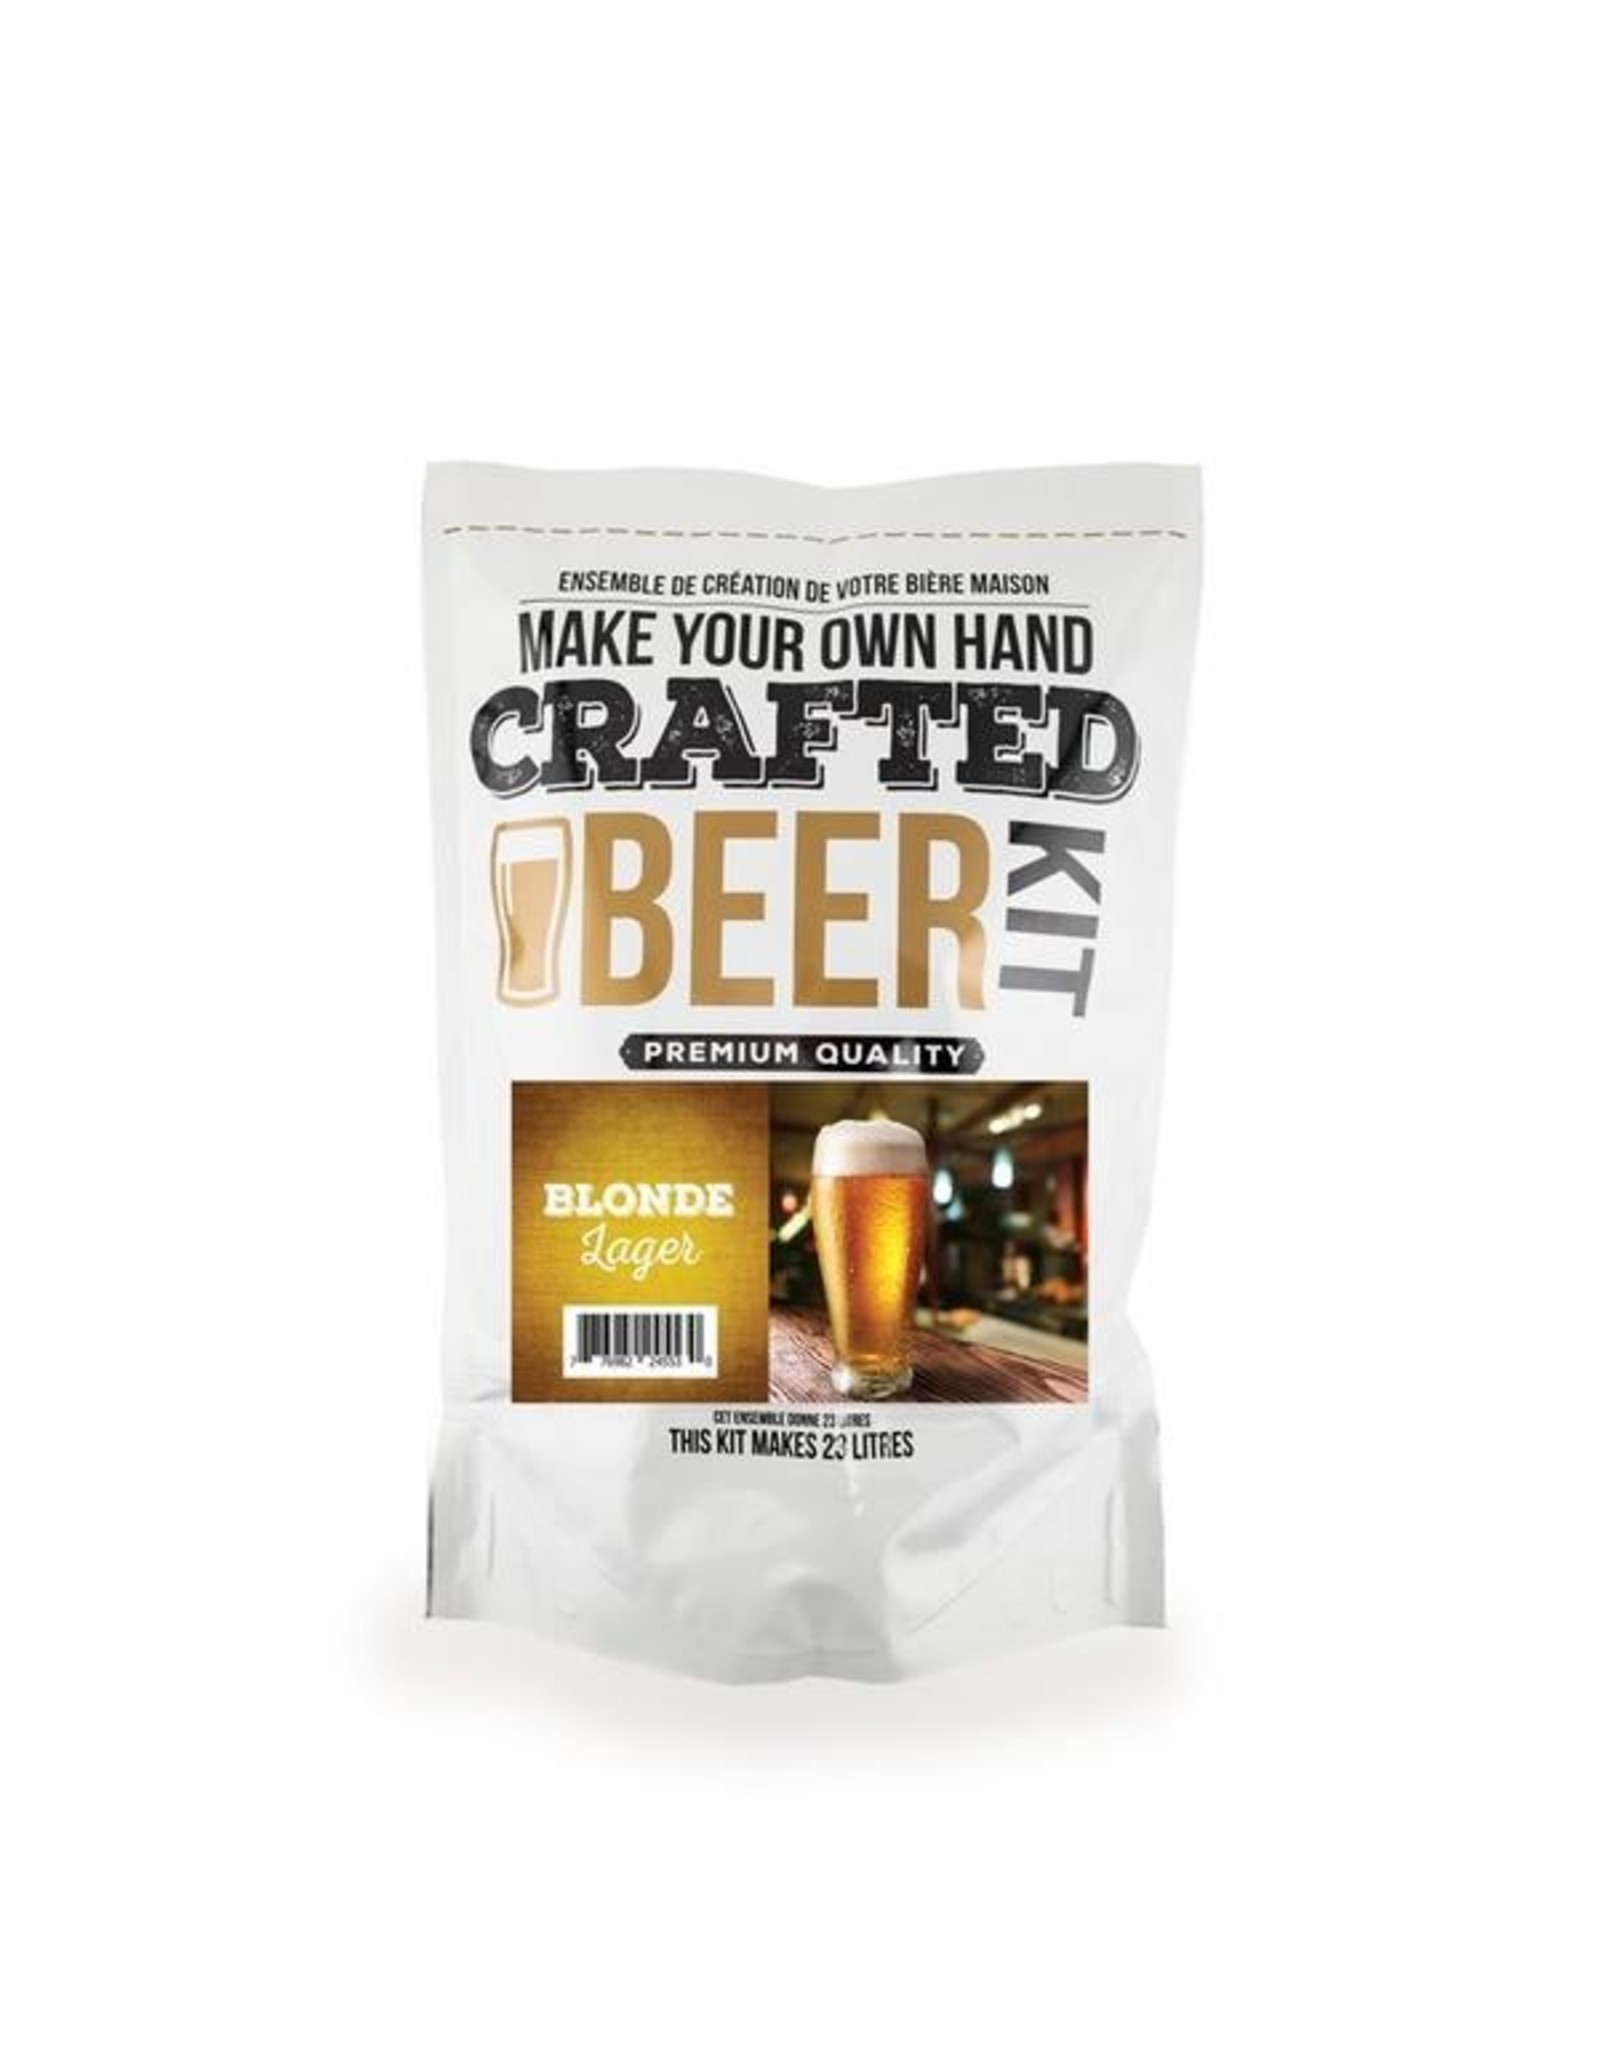 Crafted beer kit - Blonde lager